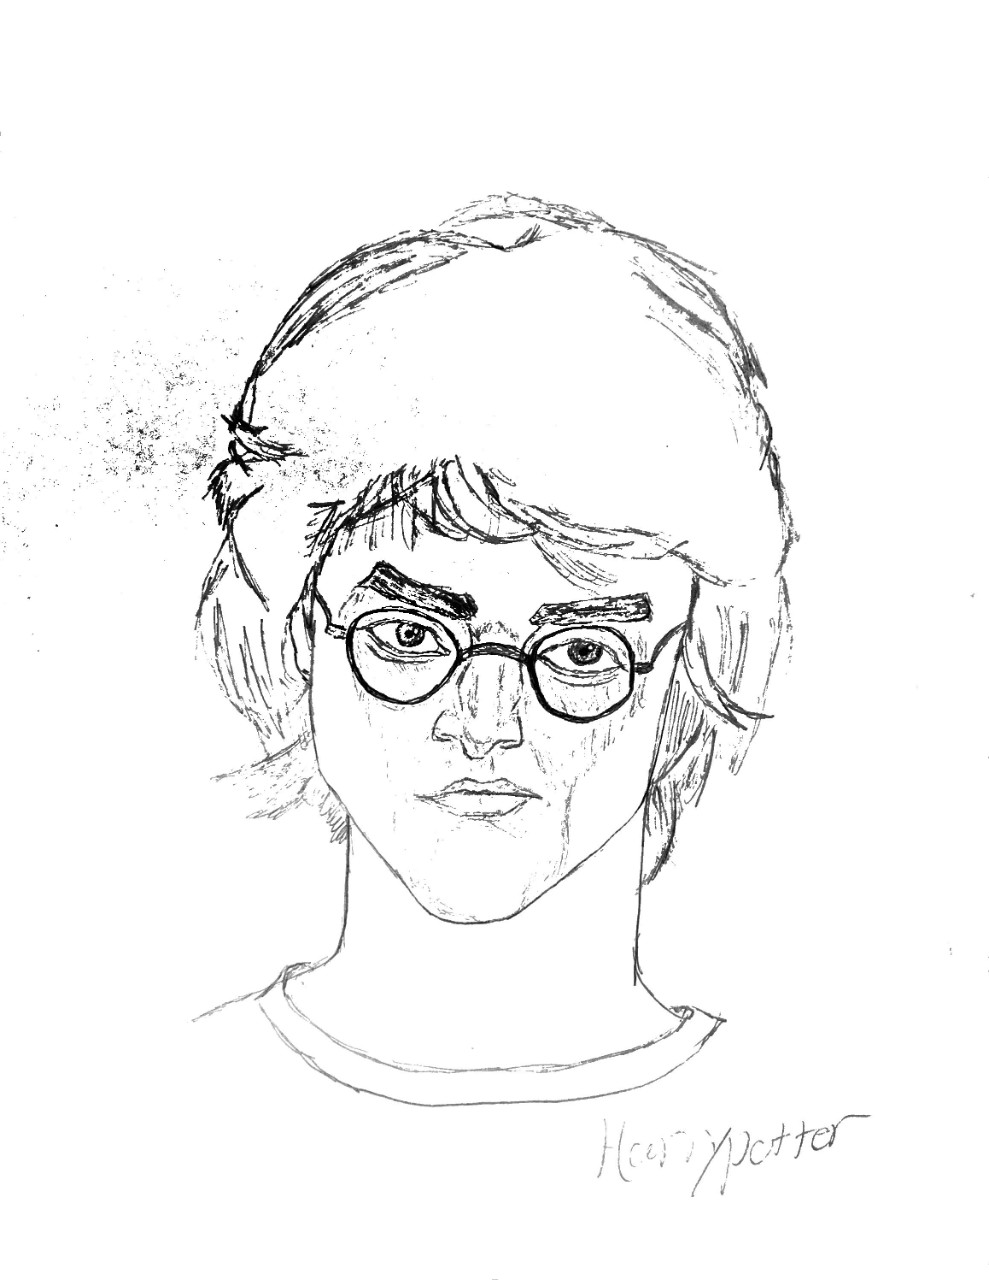 a black-and-white line drawing shows a boy in his early teens, with thick, wavy hair, thick brows, and round glasses. The boy’s face is thoughtful and serious.